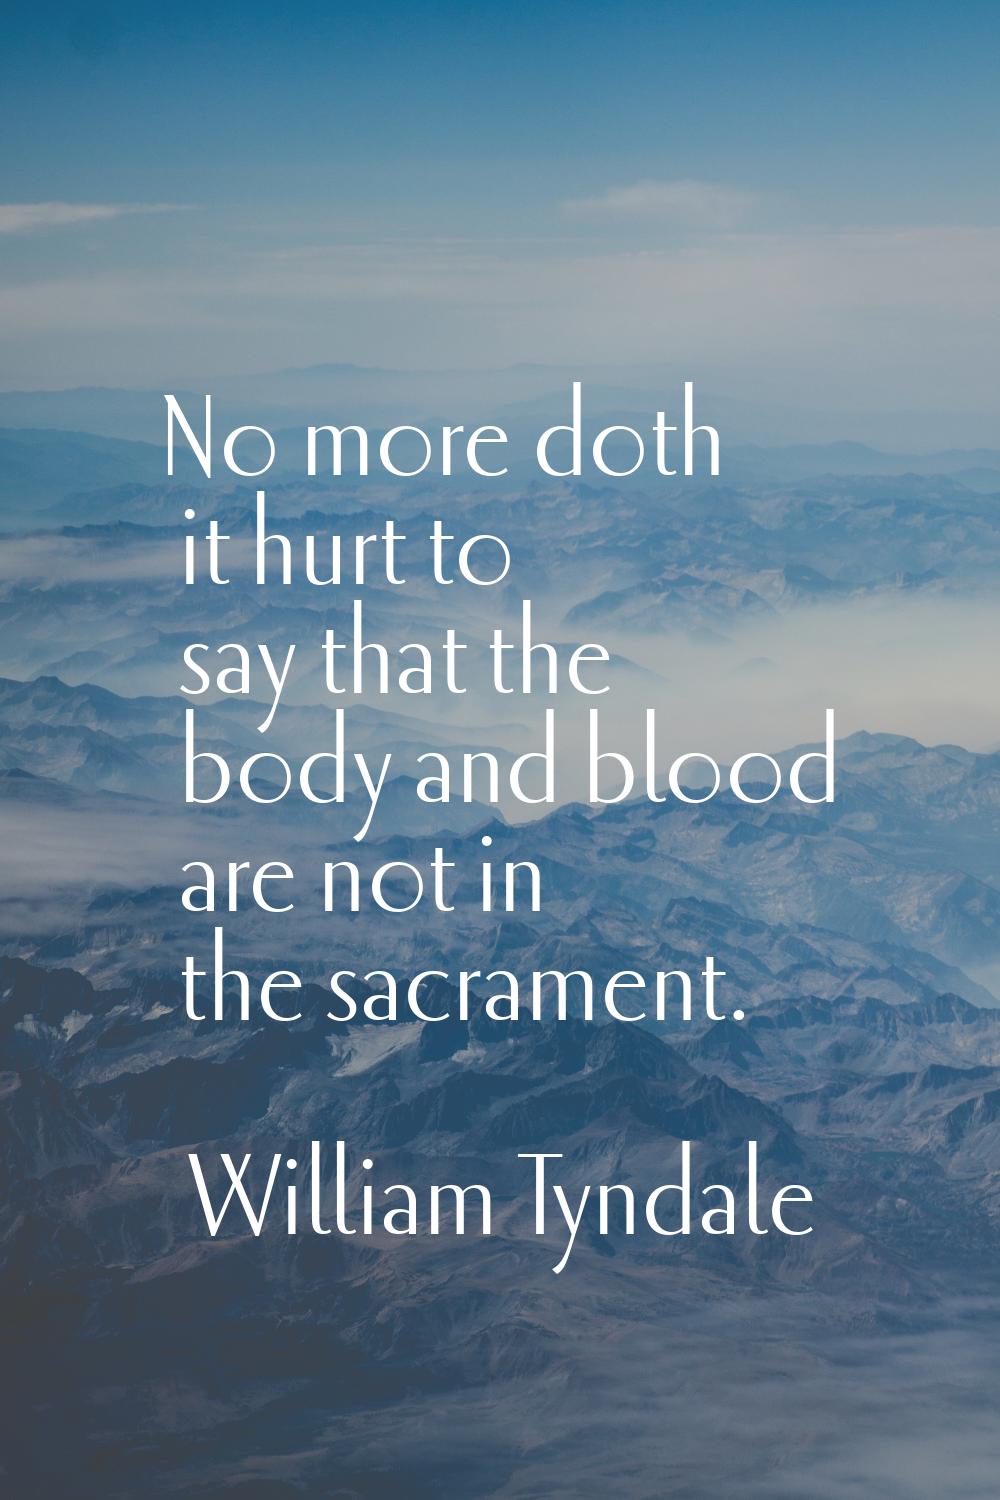 No more doth it hurt to say that the body and blood are not in the sacrament.